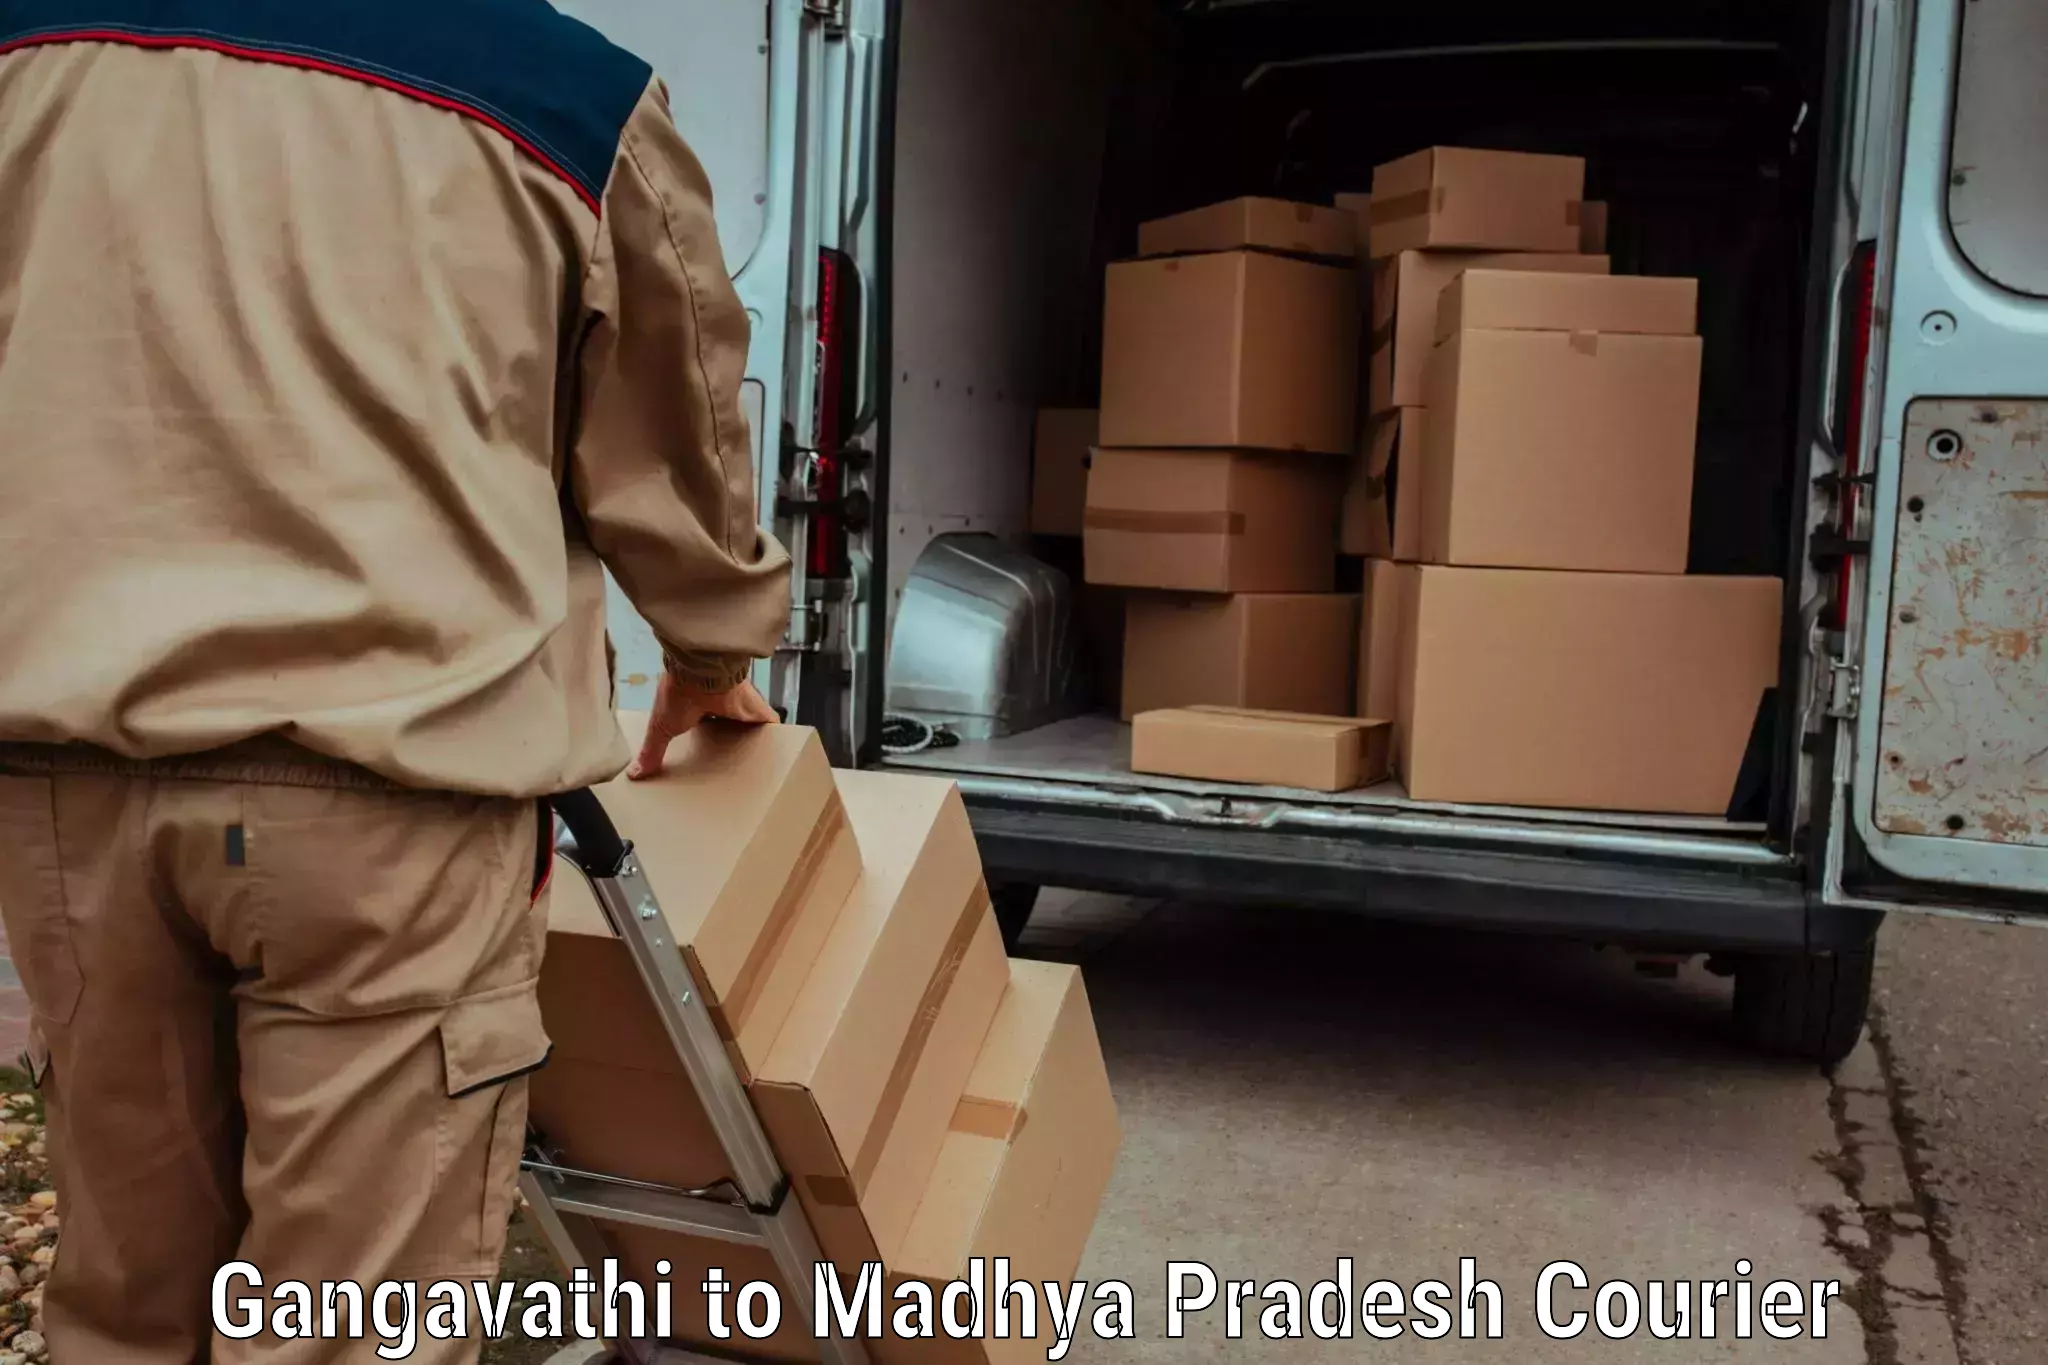 Express delivery network Gangavathi to IIIT Bhopal